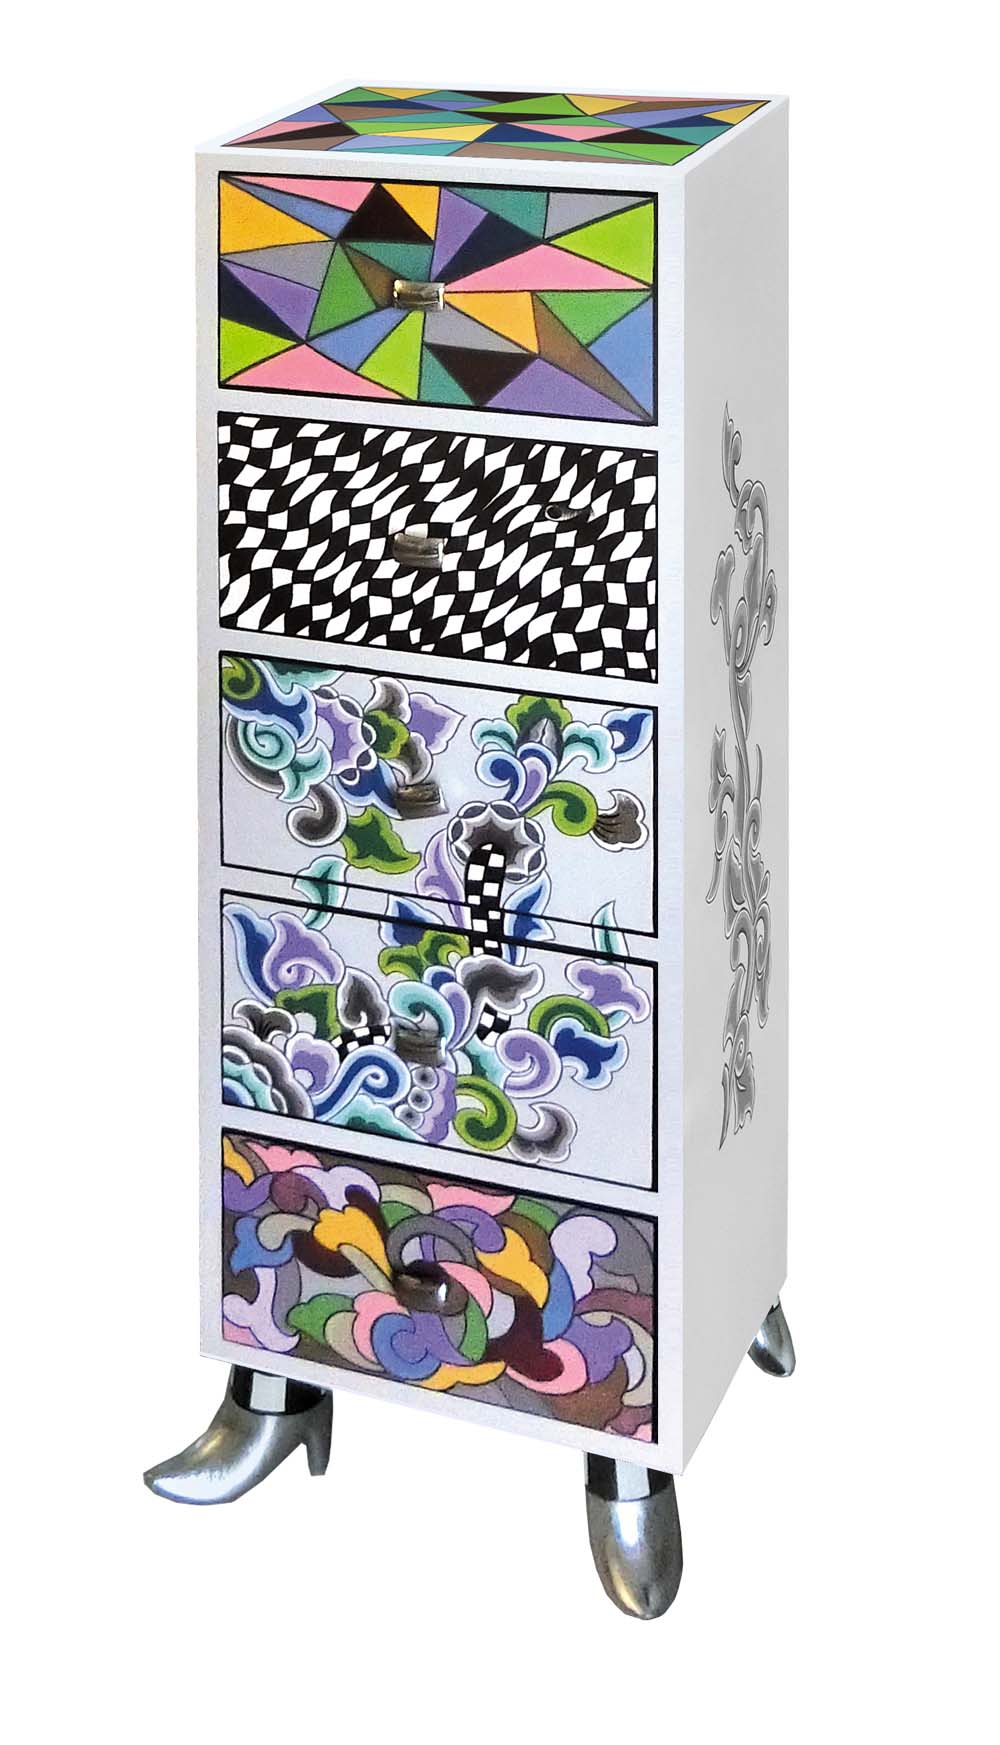 toms-drag-art-kommode-chest-of-drawers-cabinet-seattle-102172